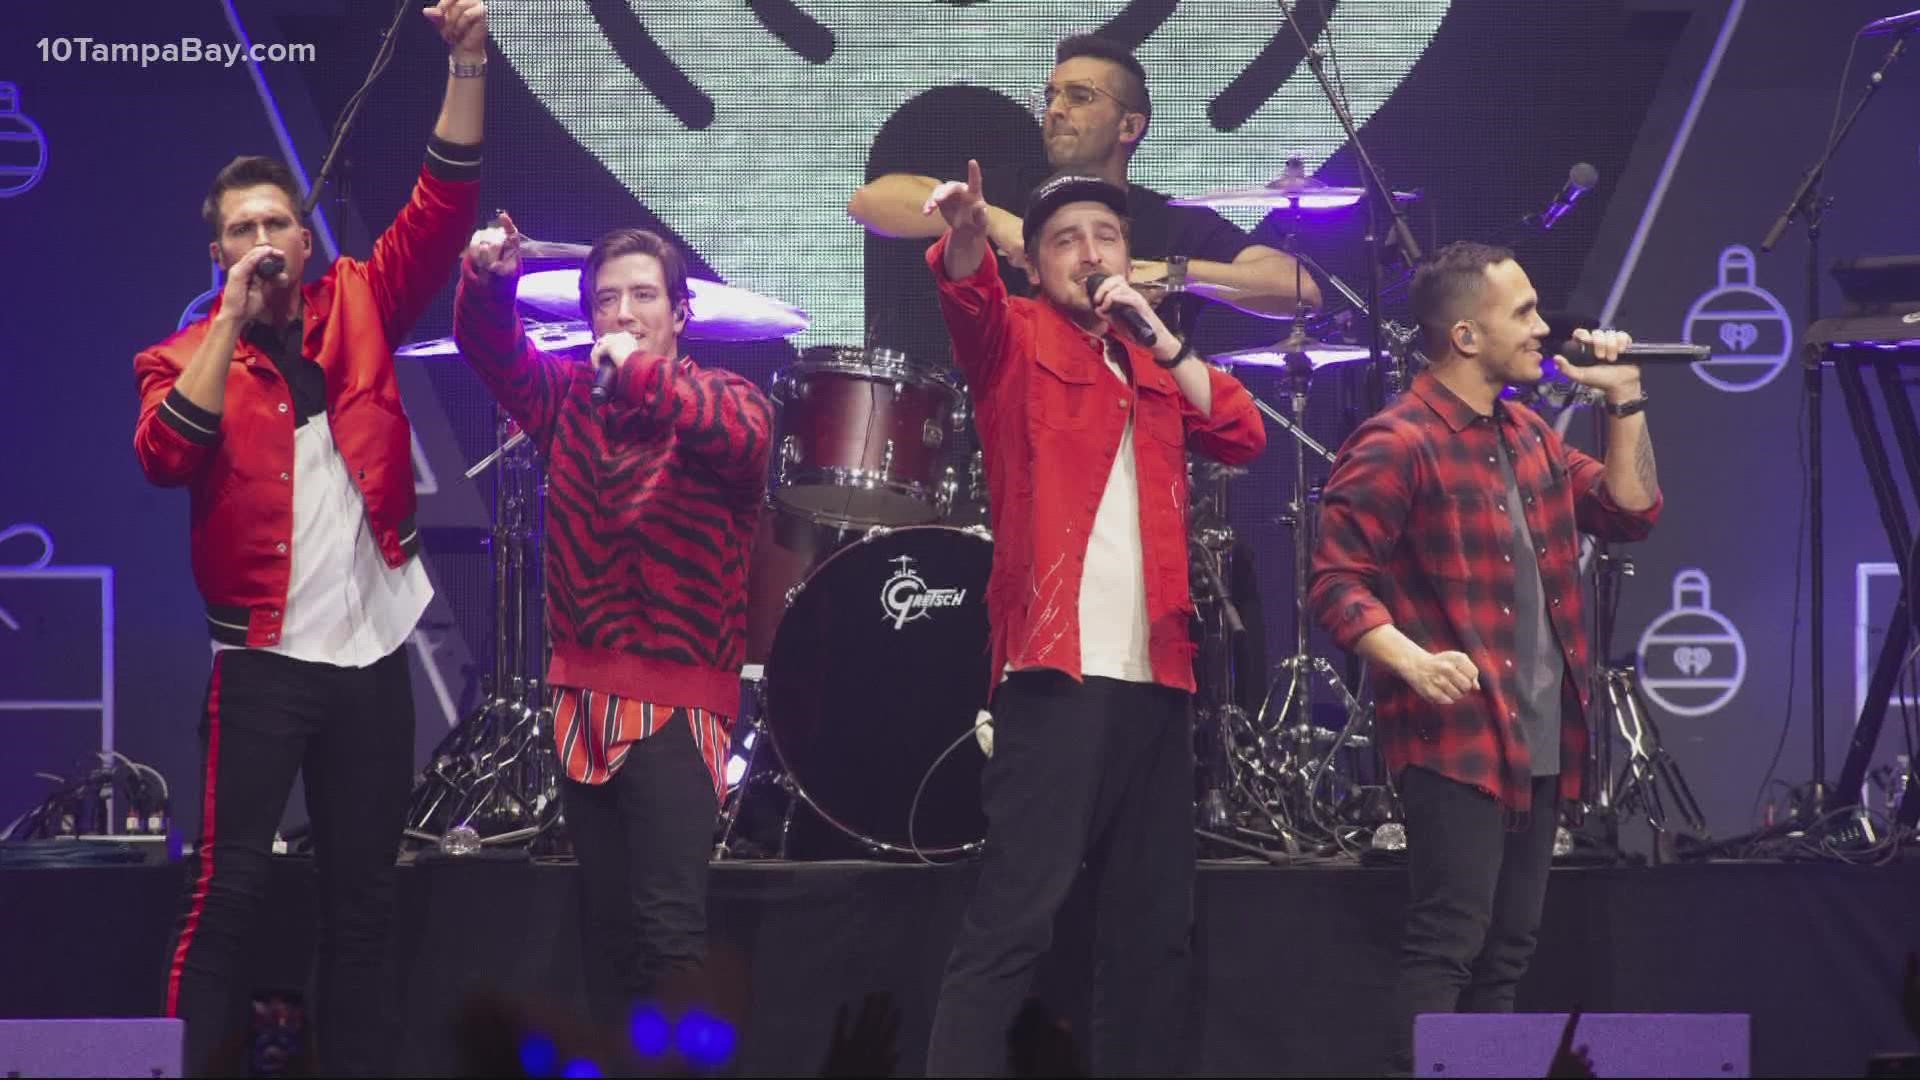 Big Time Rush is making four stops in Florida, including Tampa on July 21.